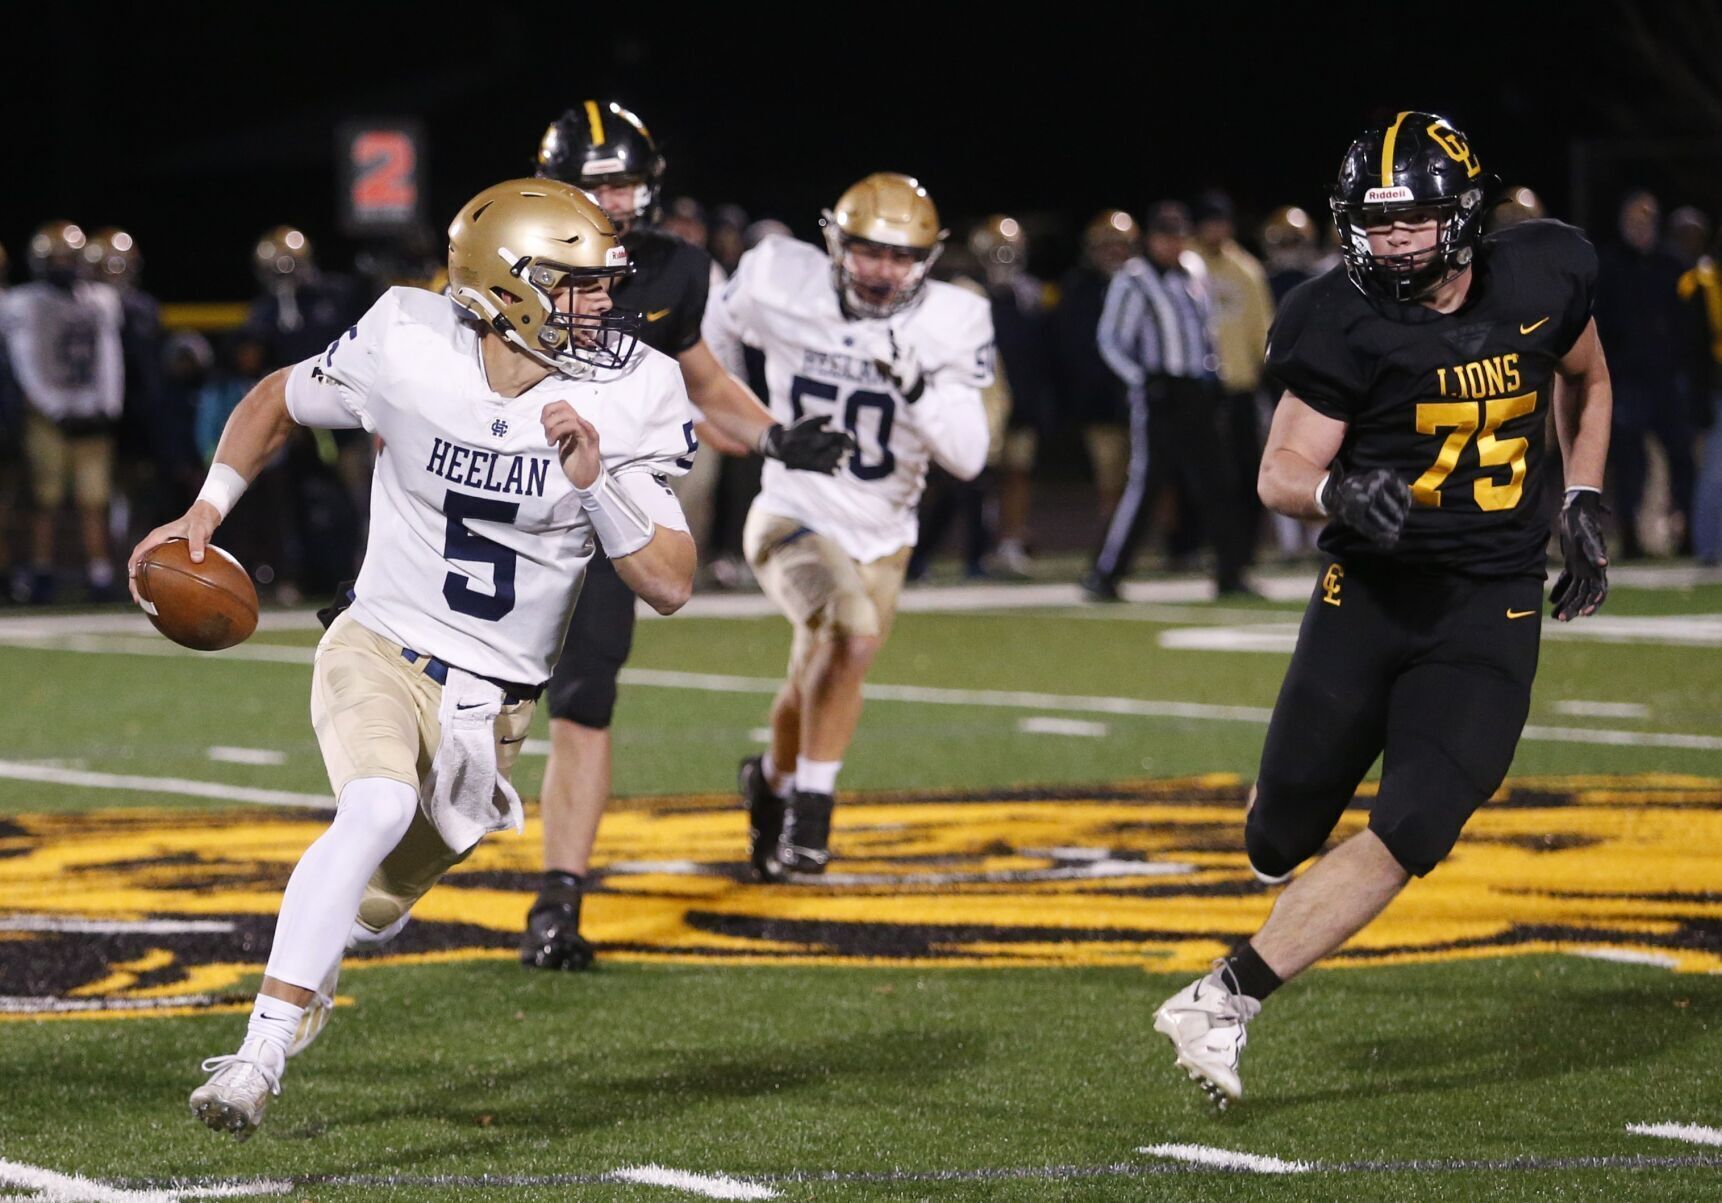 Sioux City Heelan defeats Clear Lake in close Class 3A road playoff game